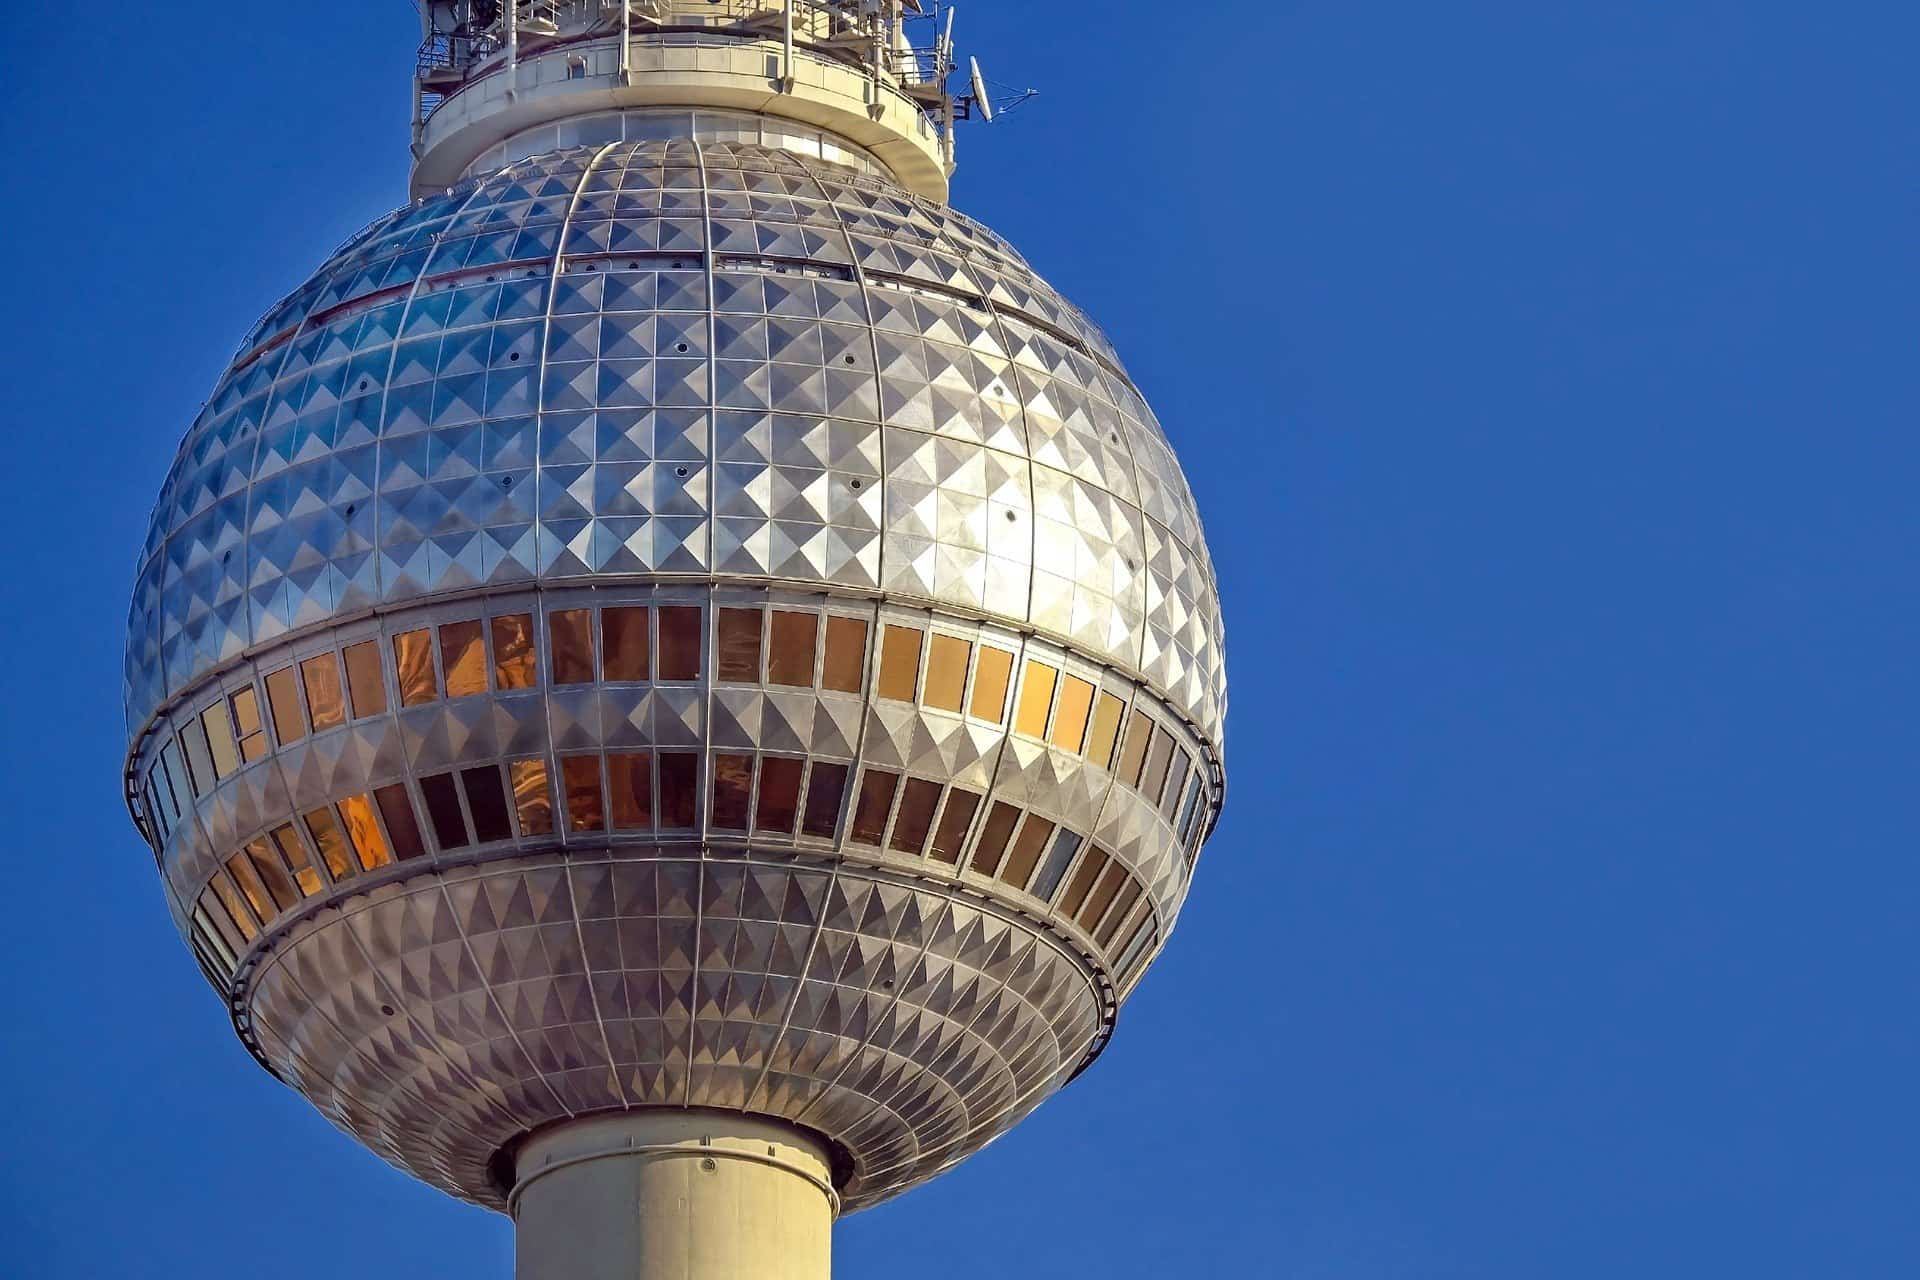 TV Tower against a clear blue sky in Berlin, Germany